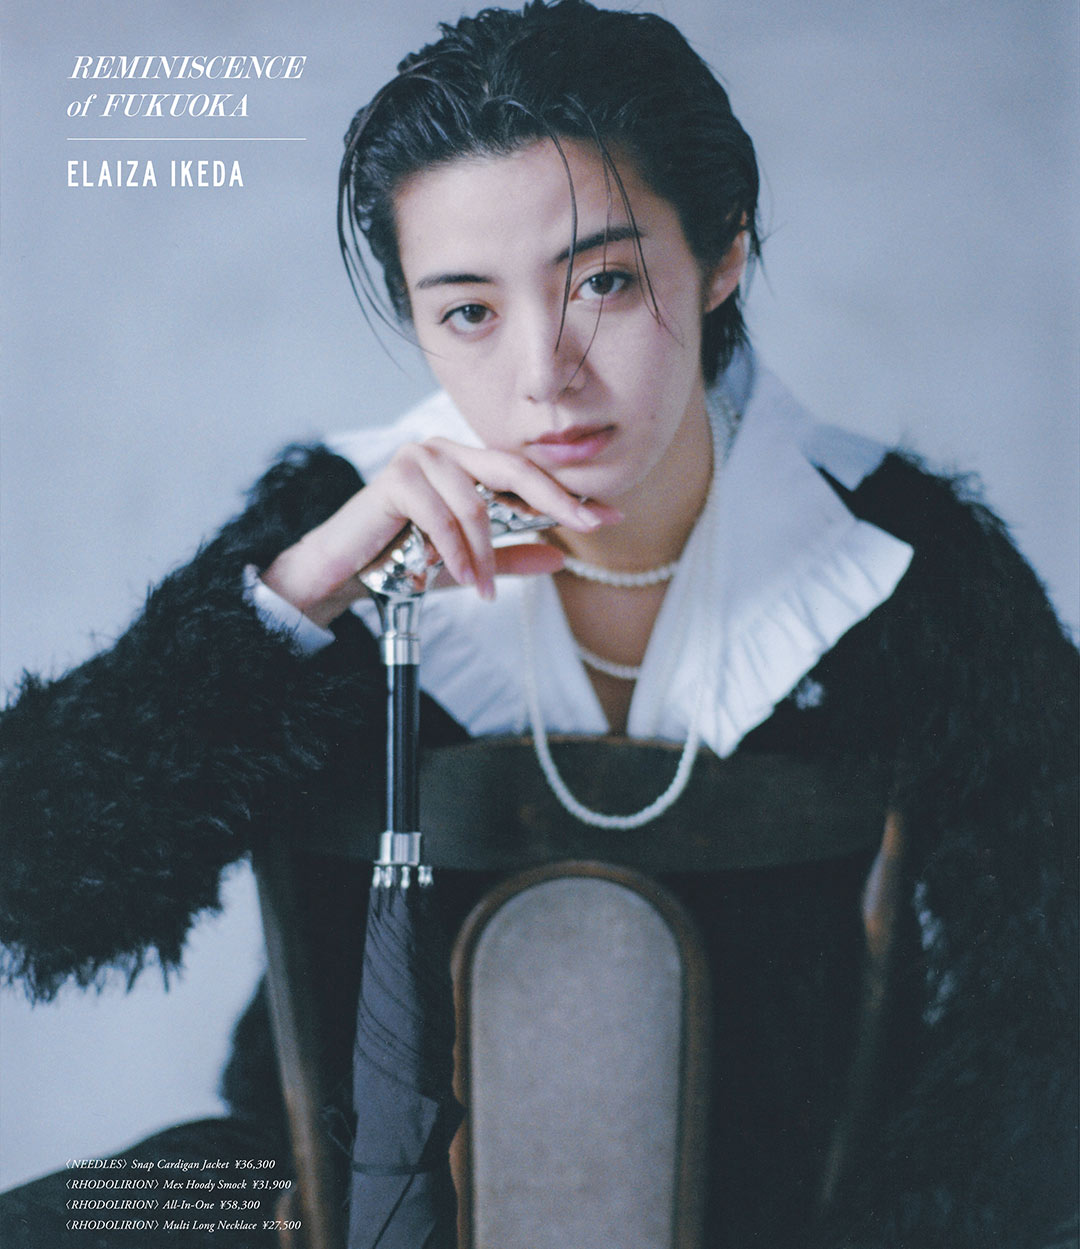 『NEPENTHES in print』 #19“NEPENTHES HAKATA 10th Anniv. Issue”